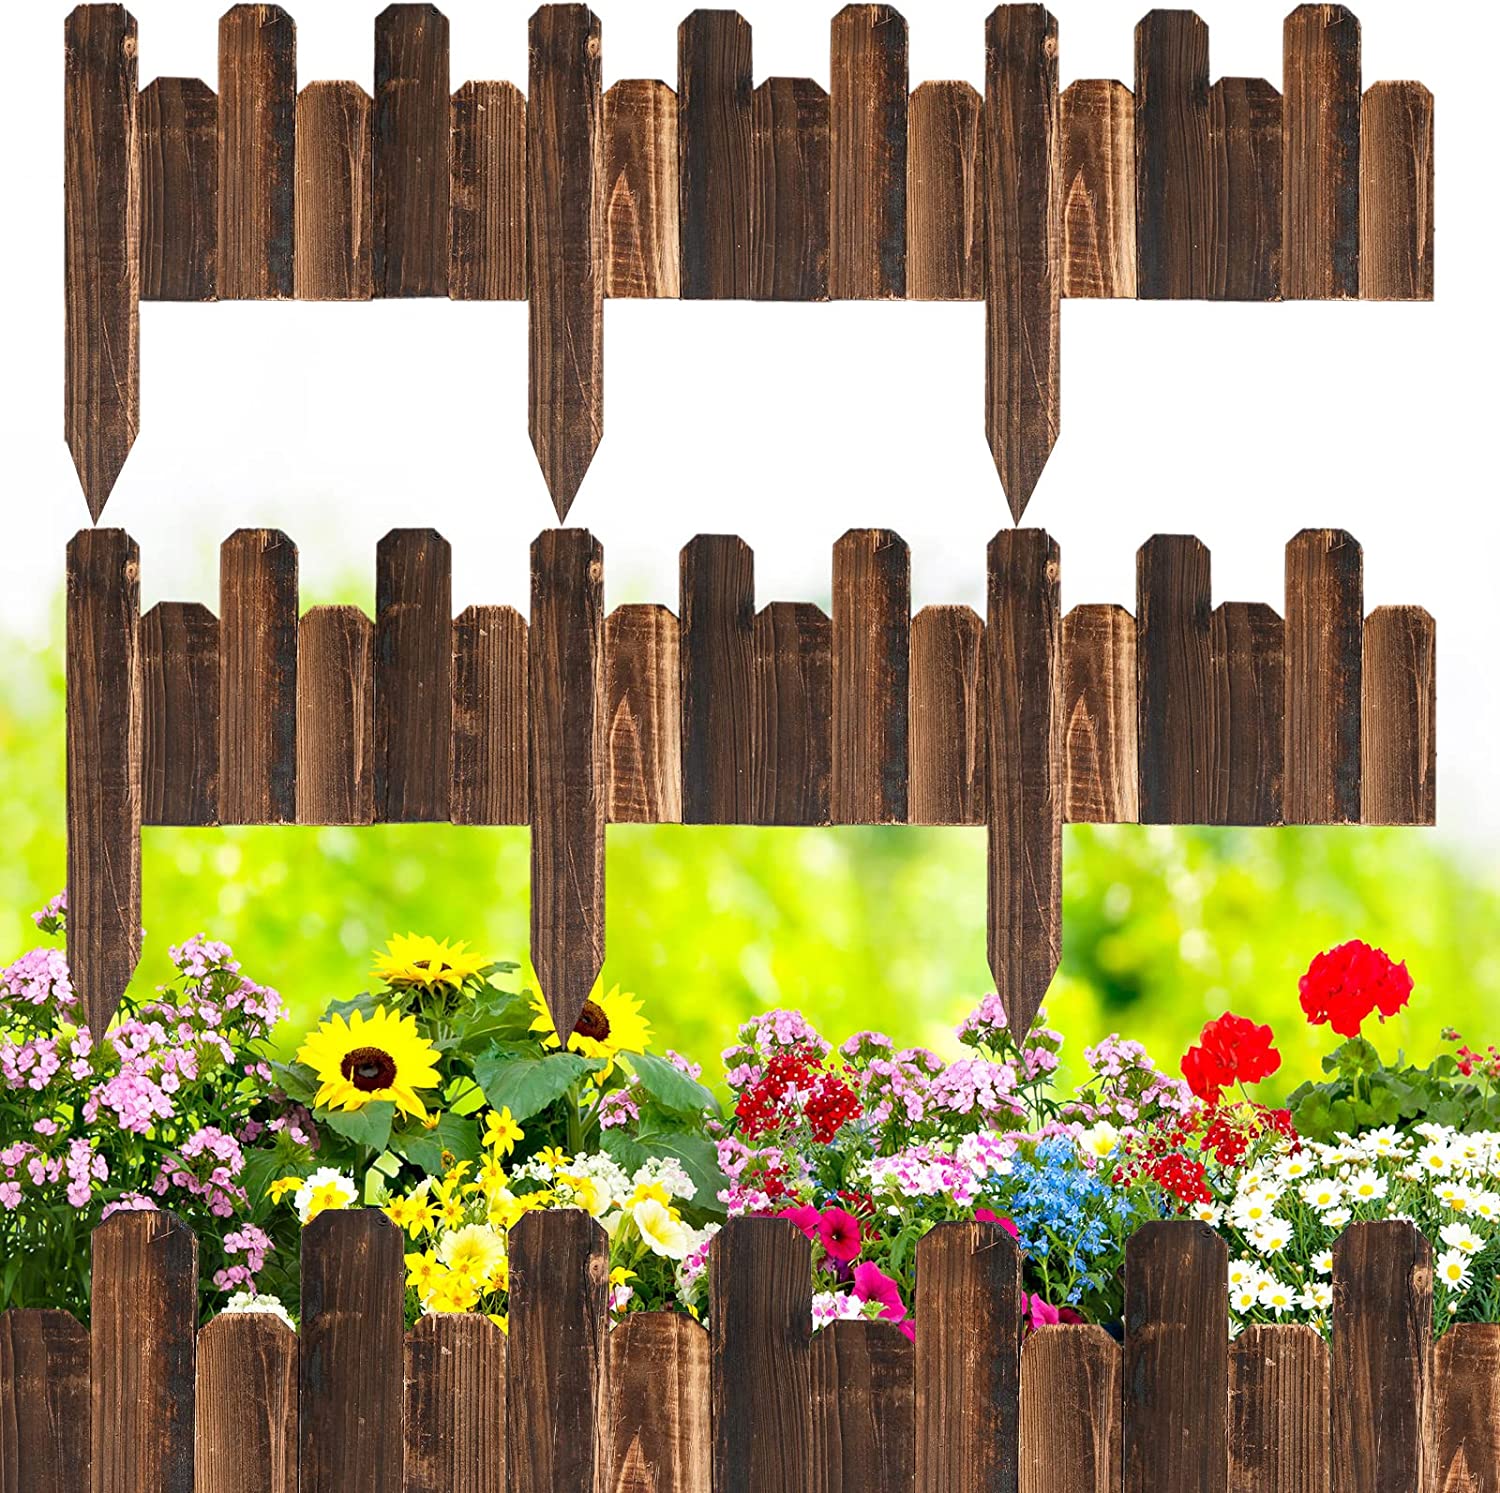 EasyFlex Decorative No-Dig Landscape Edging with Anchoring Spikes, 2.5 in.  Tall Scalloped Top Garden Border with Woodgrain Texture, 100 Foot Kit